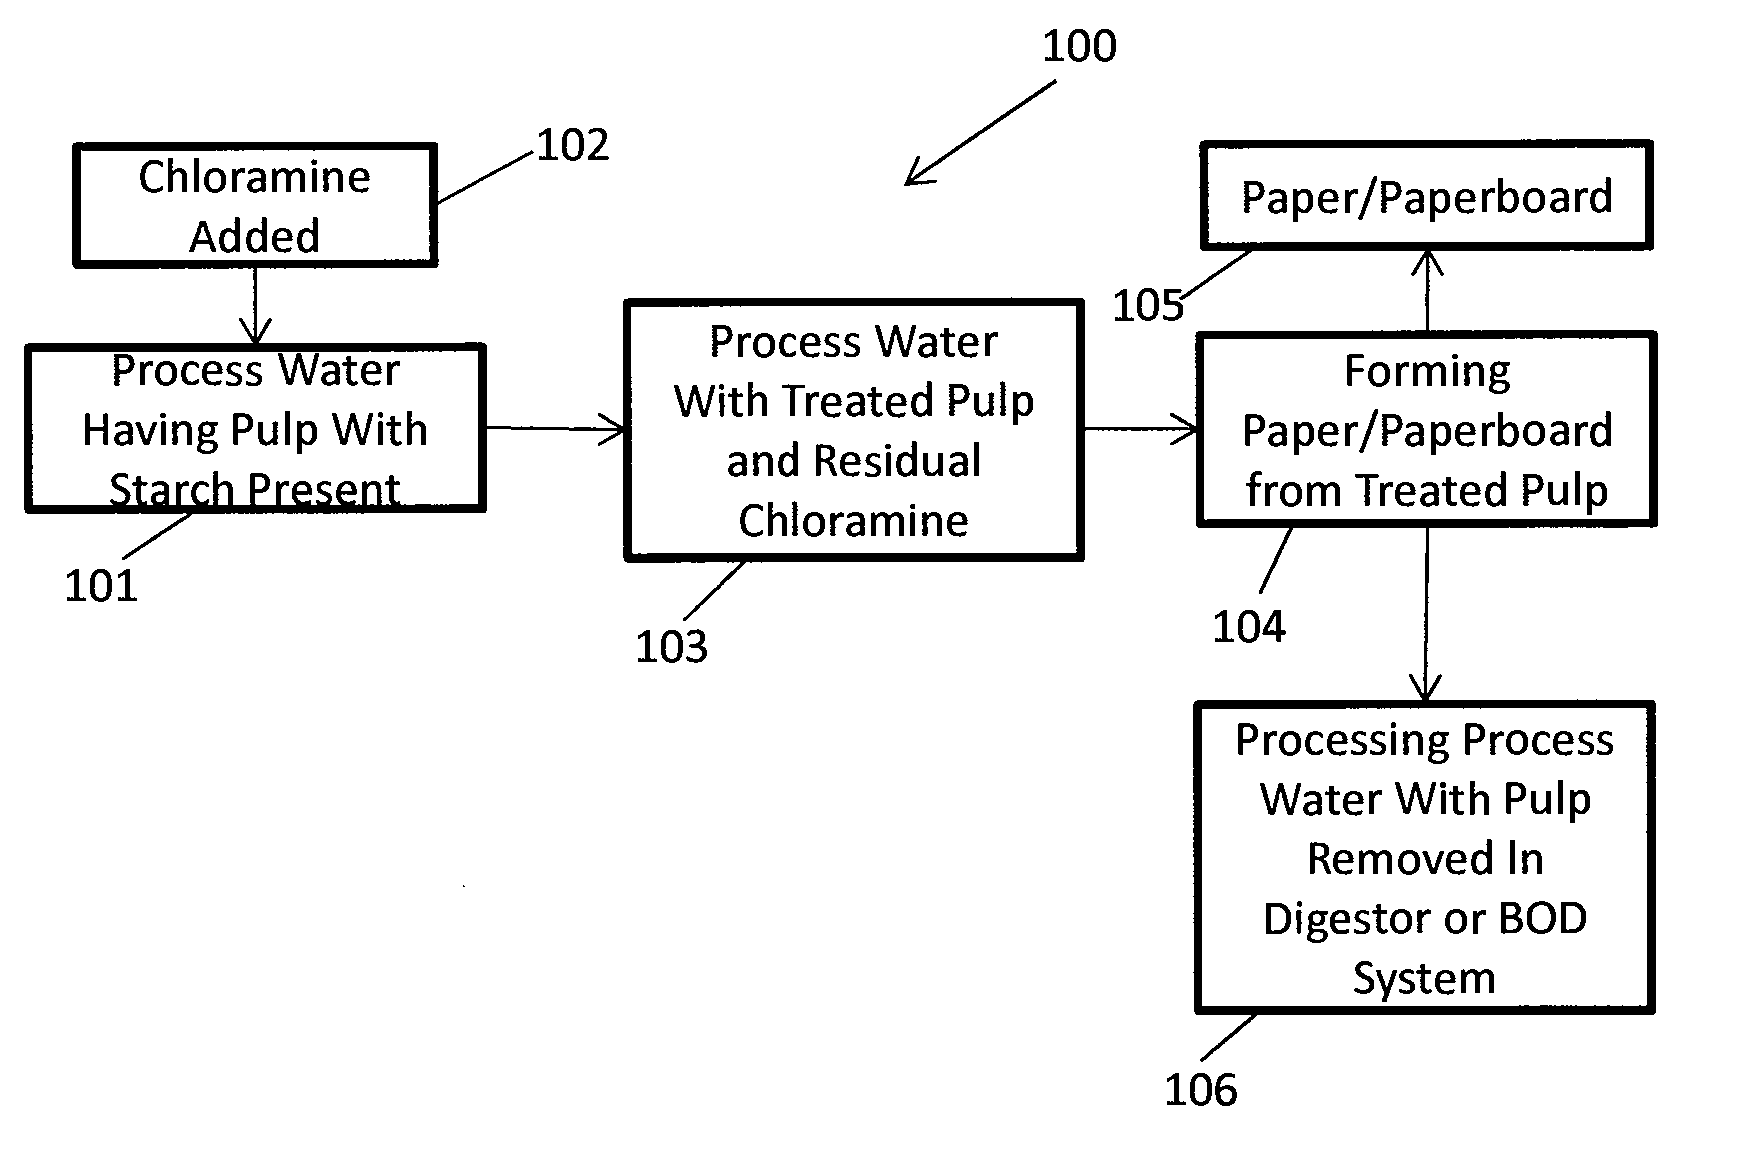 Methods of preserving starch in pulp and controlling calcium precipitation and/or scaling